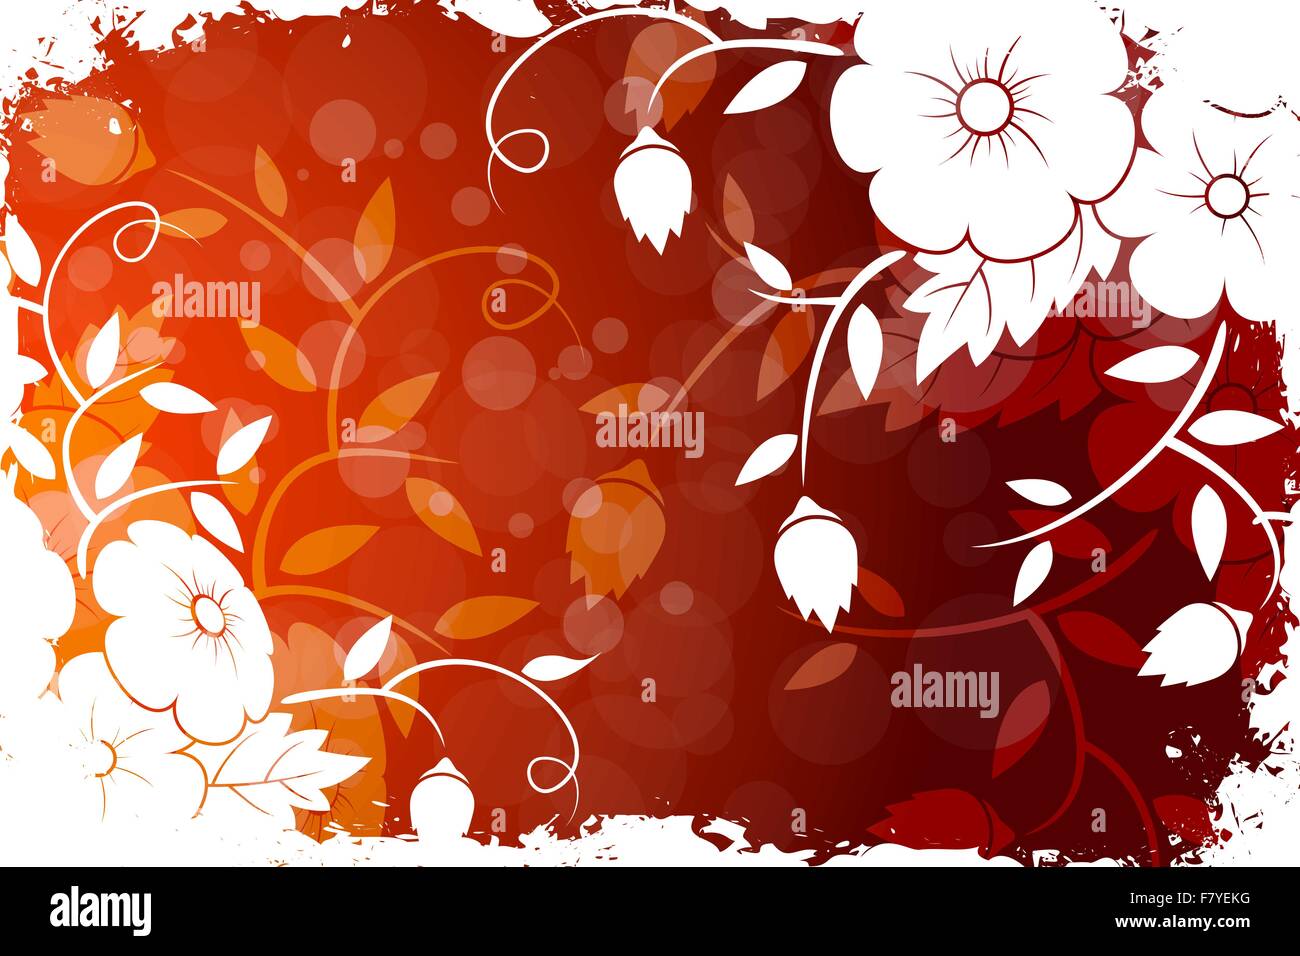 Grungy Floral Background Stock Vector